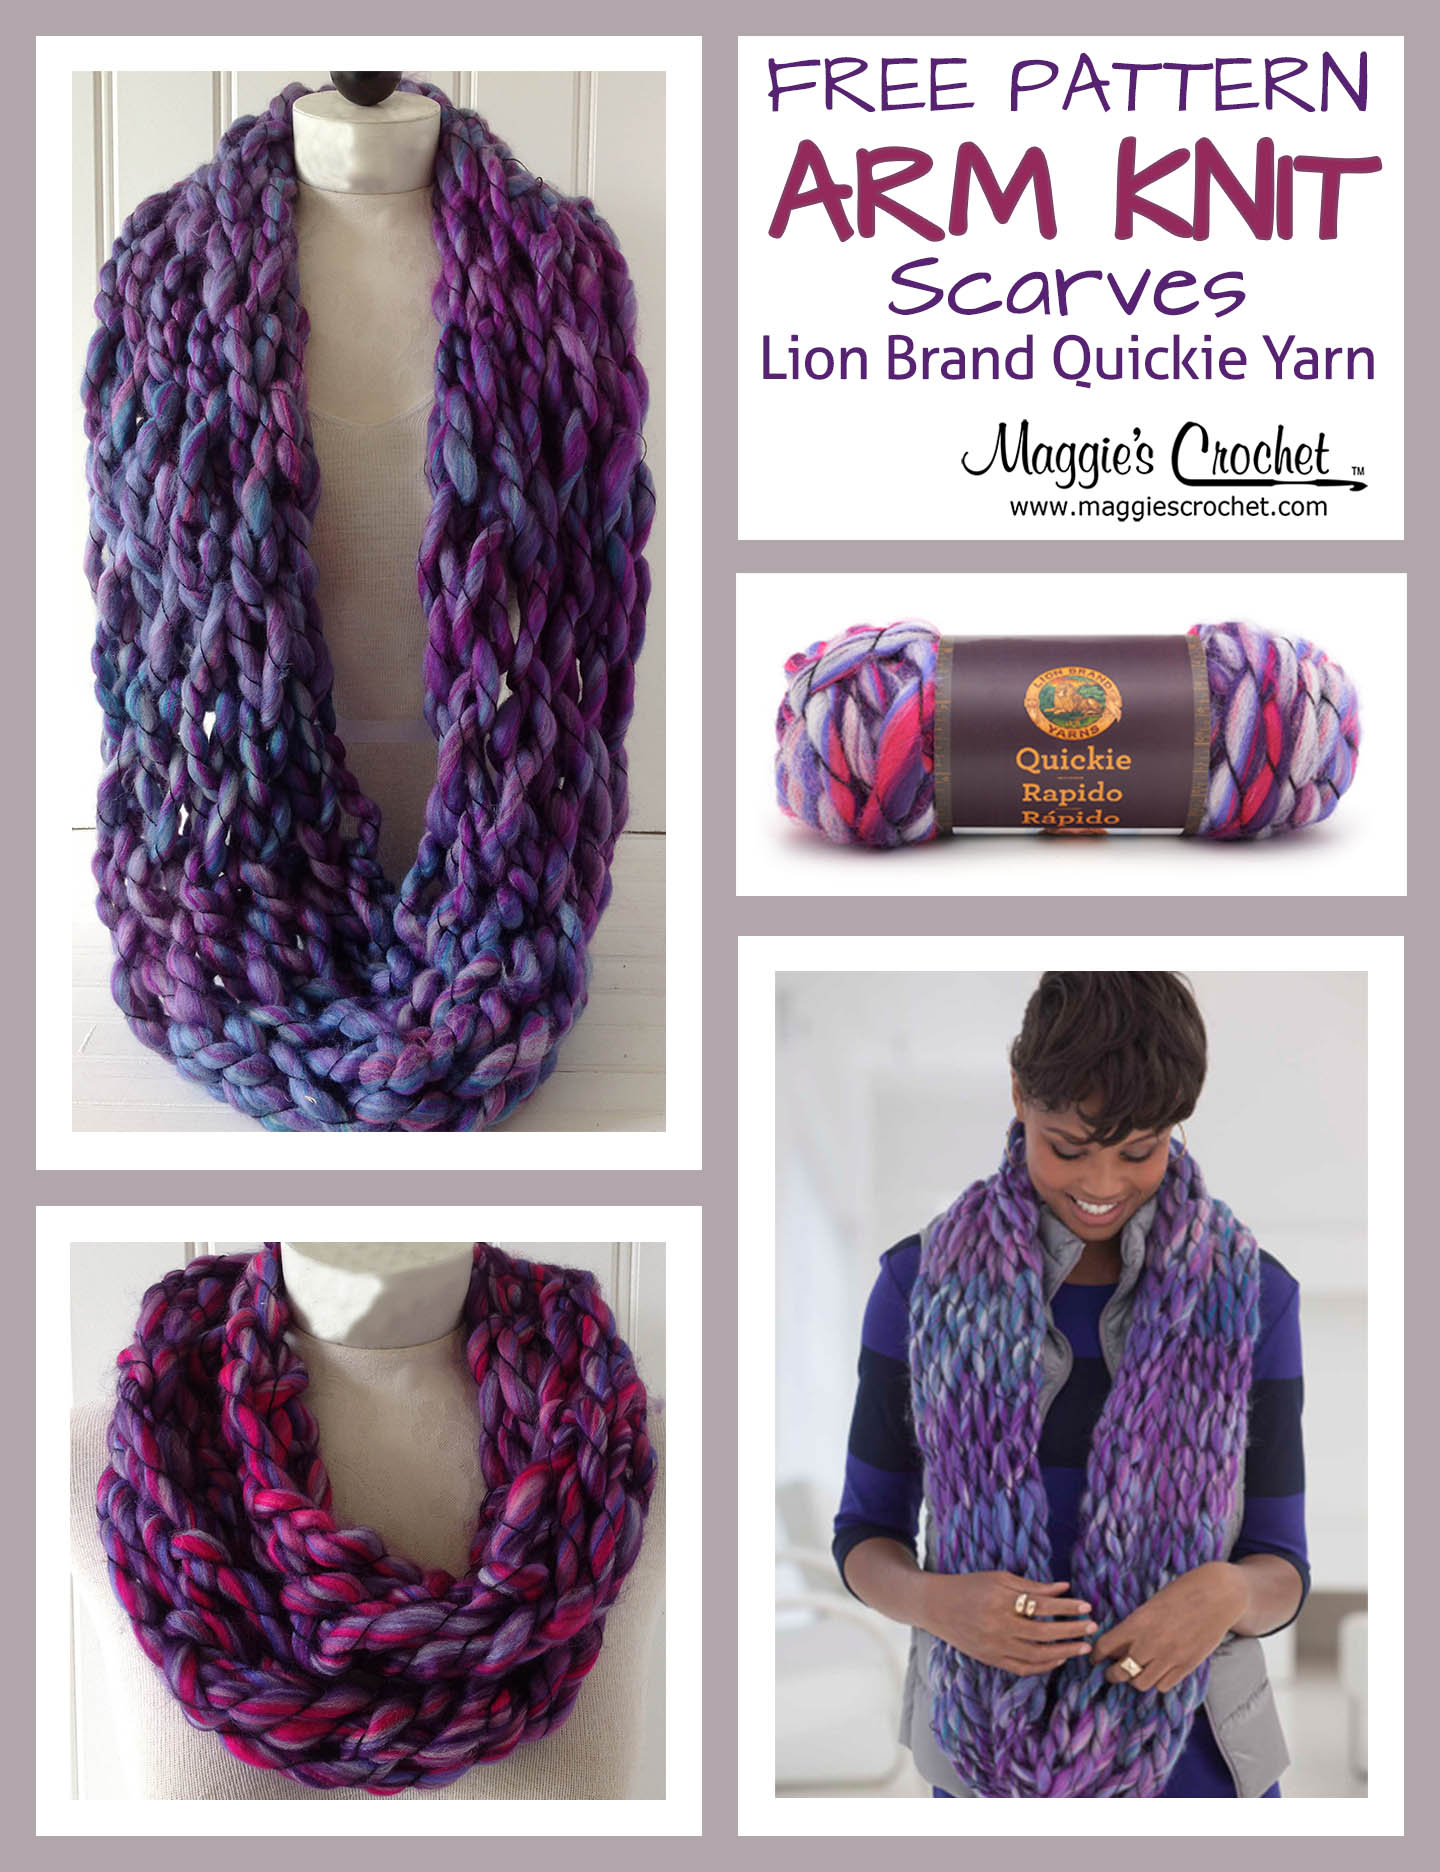 Lion Brand Free Crochet Patterns Arm Knit Scarf With Lion Brand Quickie Yarn